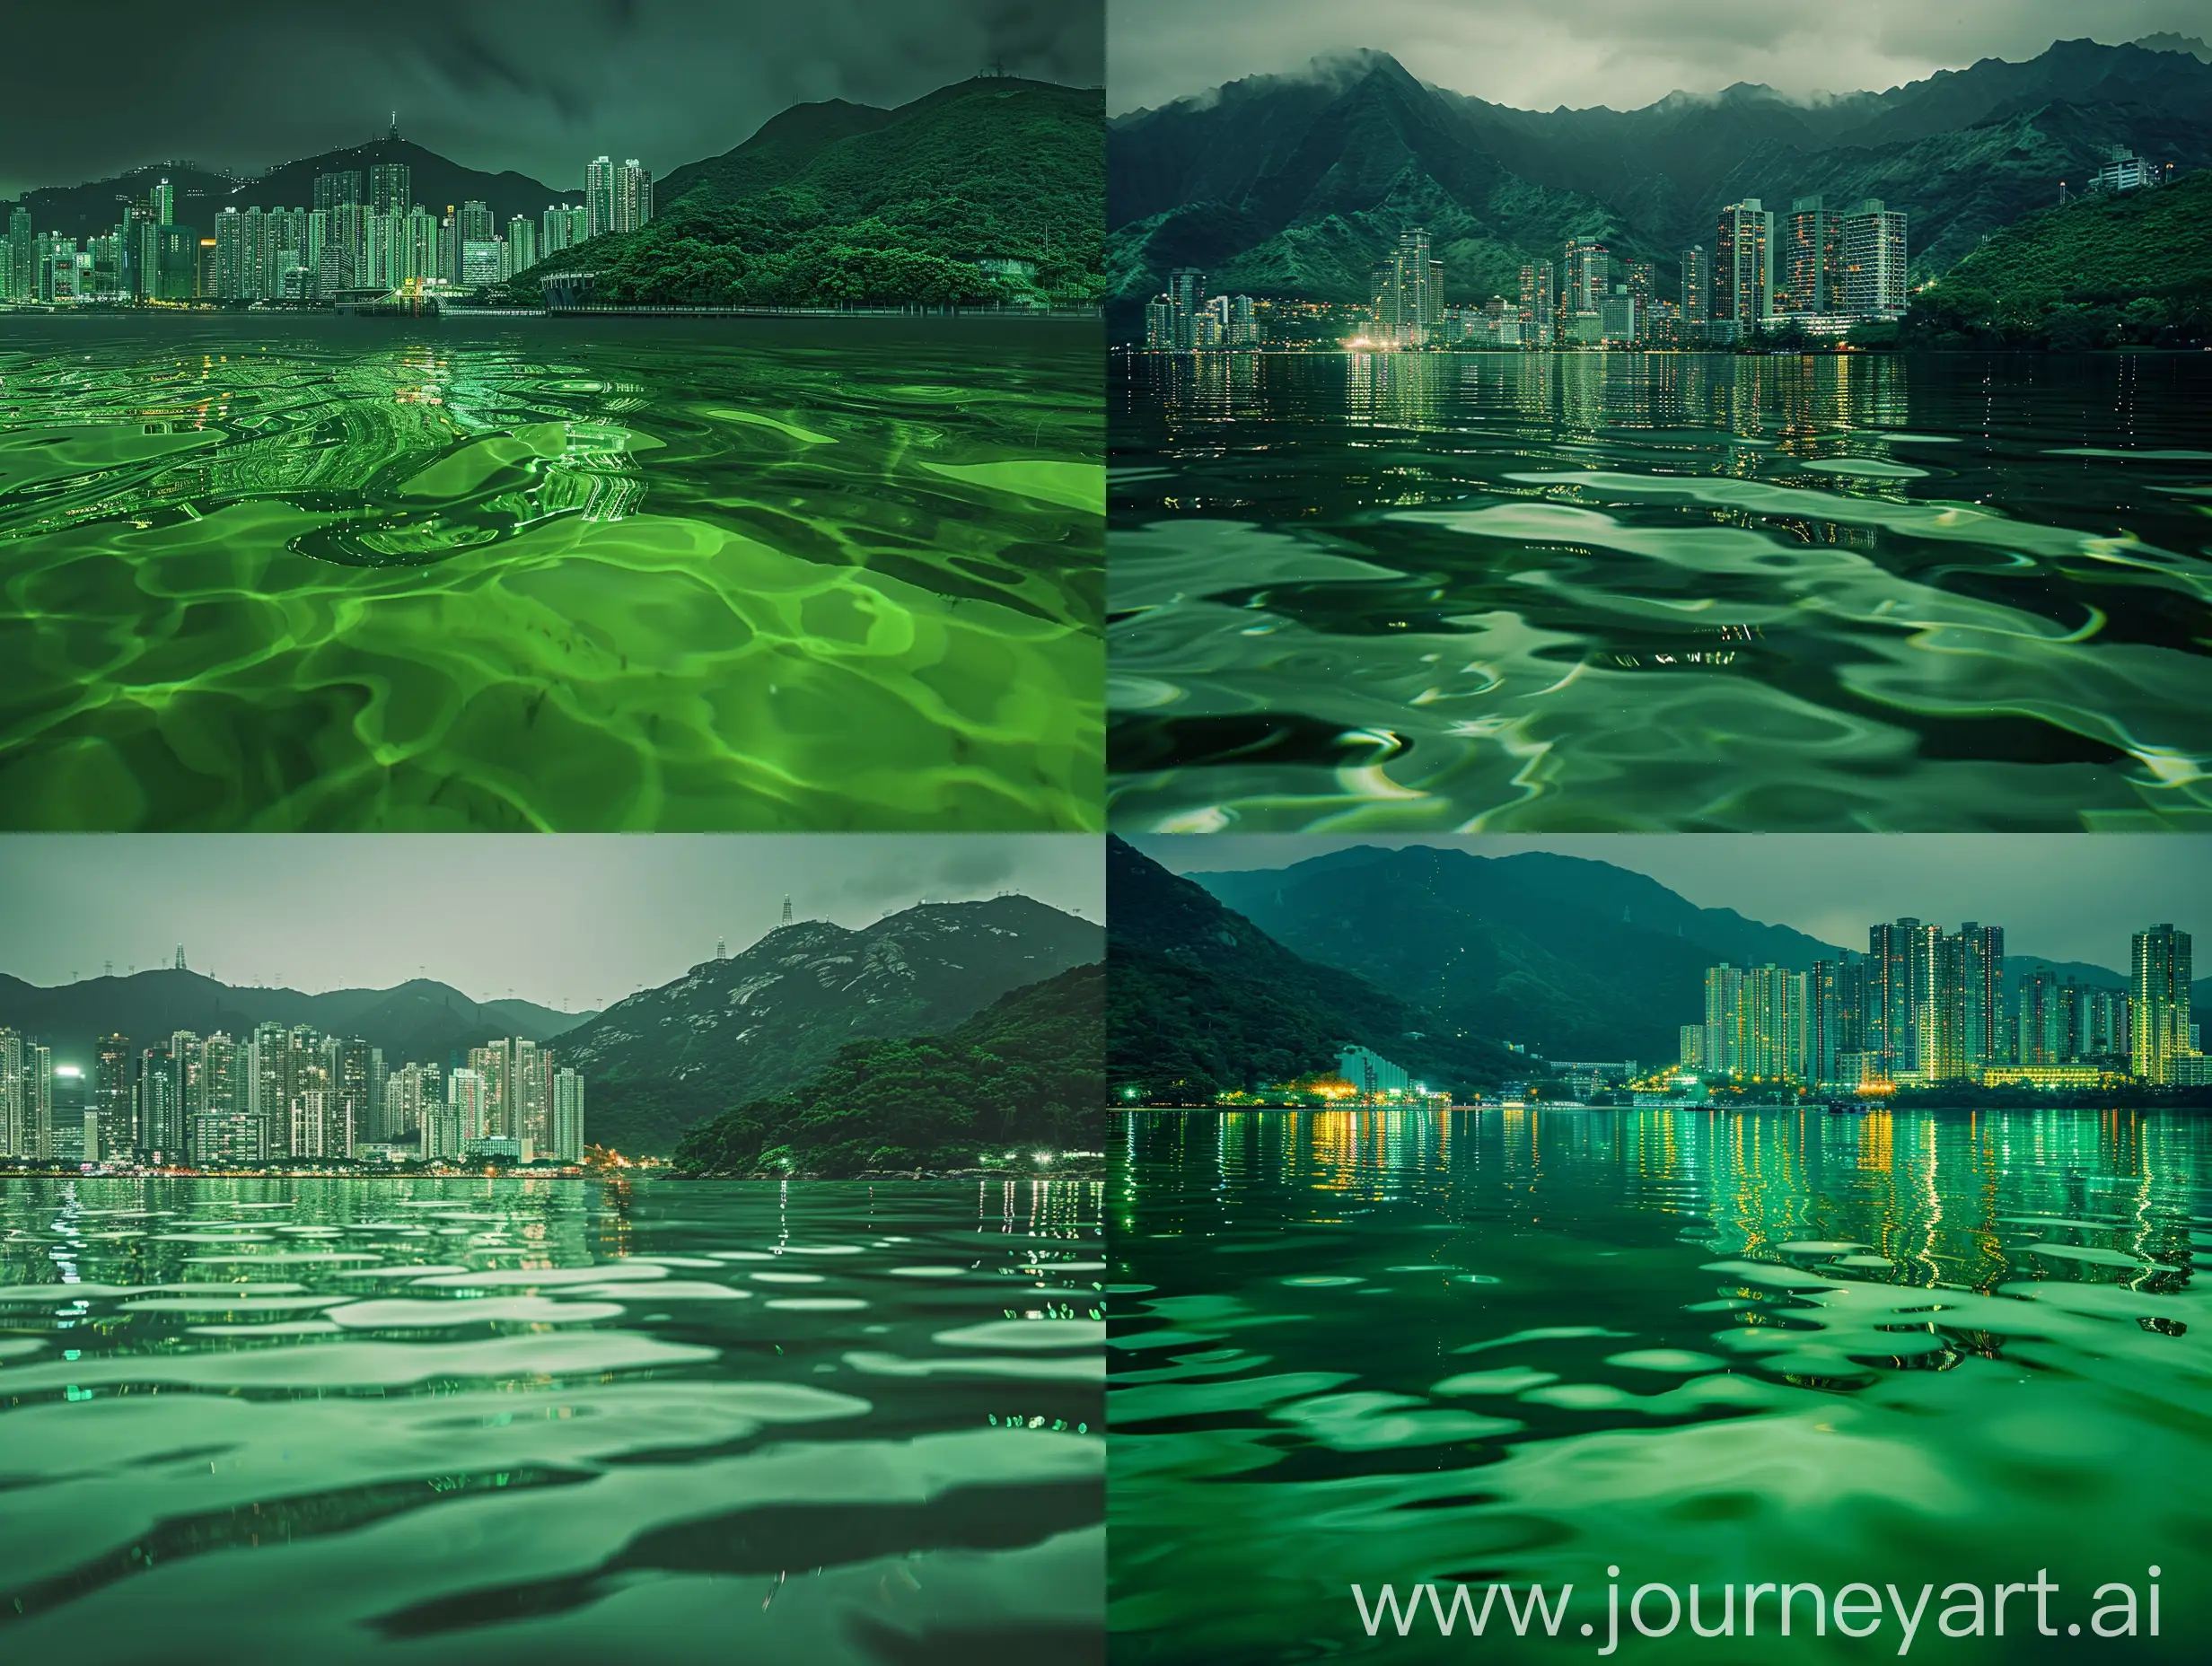 The green water and lush mountains reflect the splendid city skyline, Hasselblad camera 4K, cinematic composition, night scene, water ripples, delicate light and shadow, ultra-wide angle, perfect focus, extreme image quality, artistic sense.